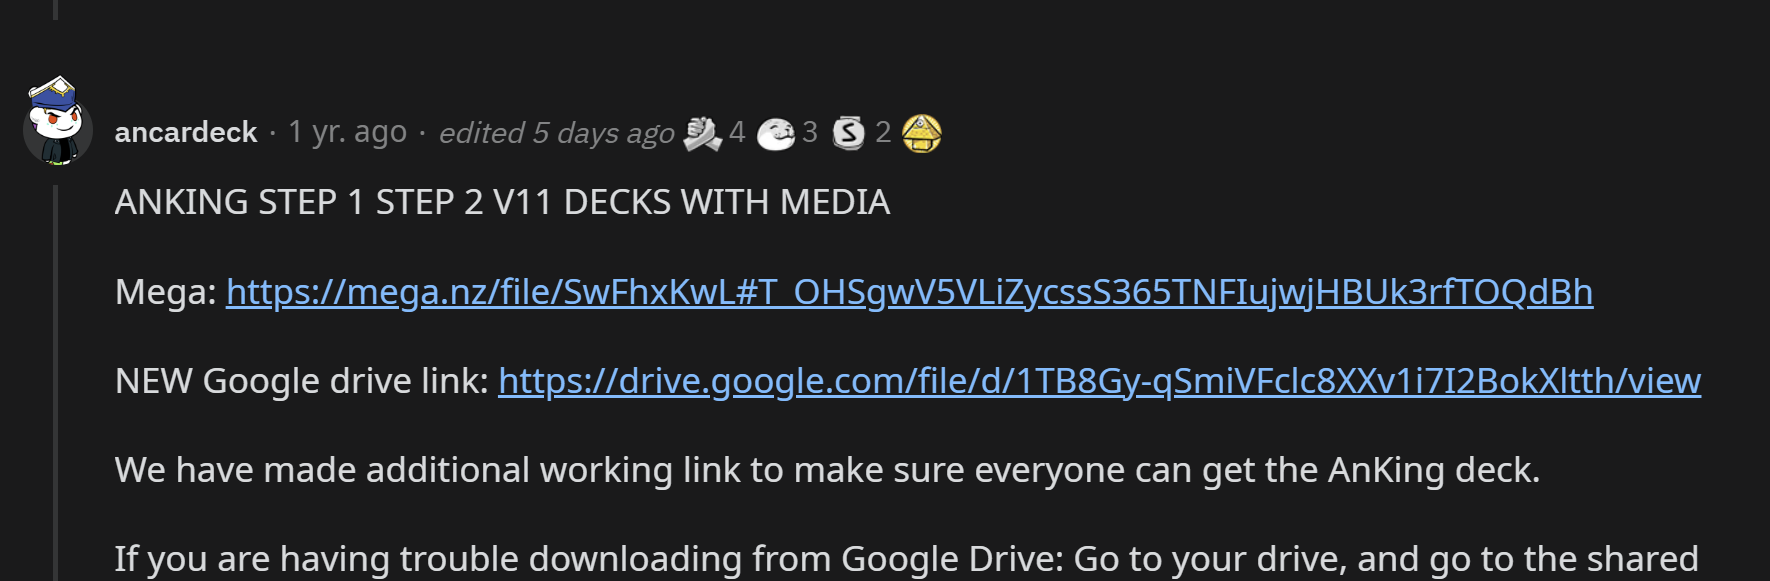 Download AnKing with Media is always in the comments, it has all of the material mentioned in the article